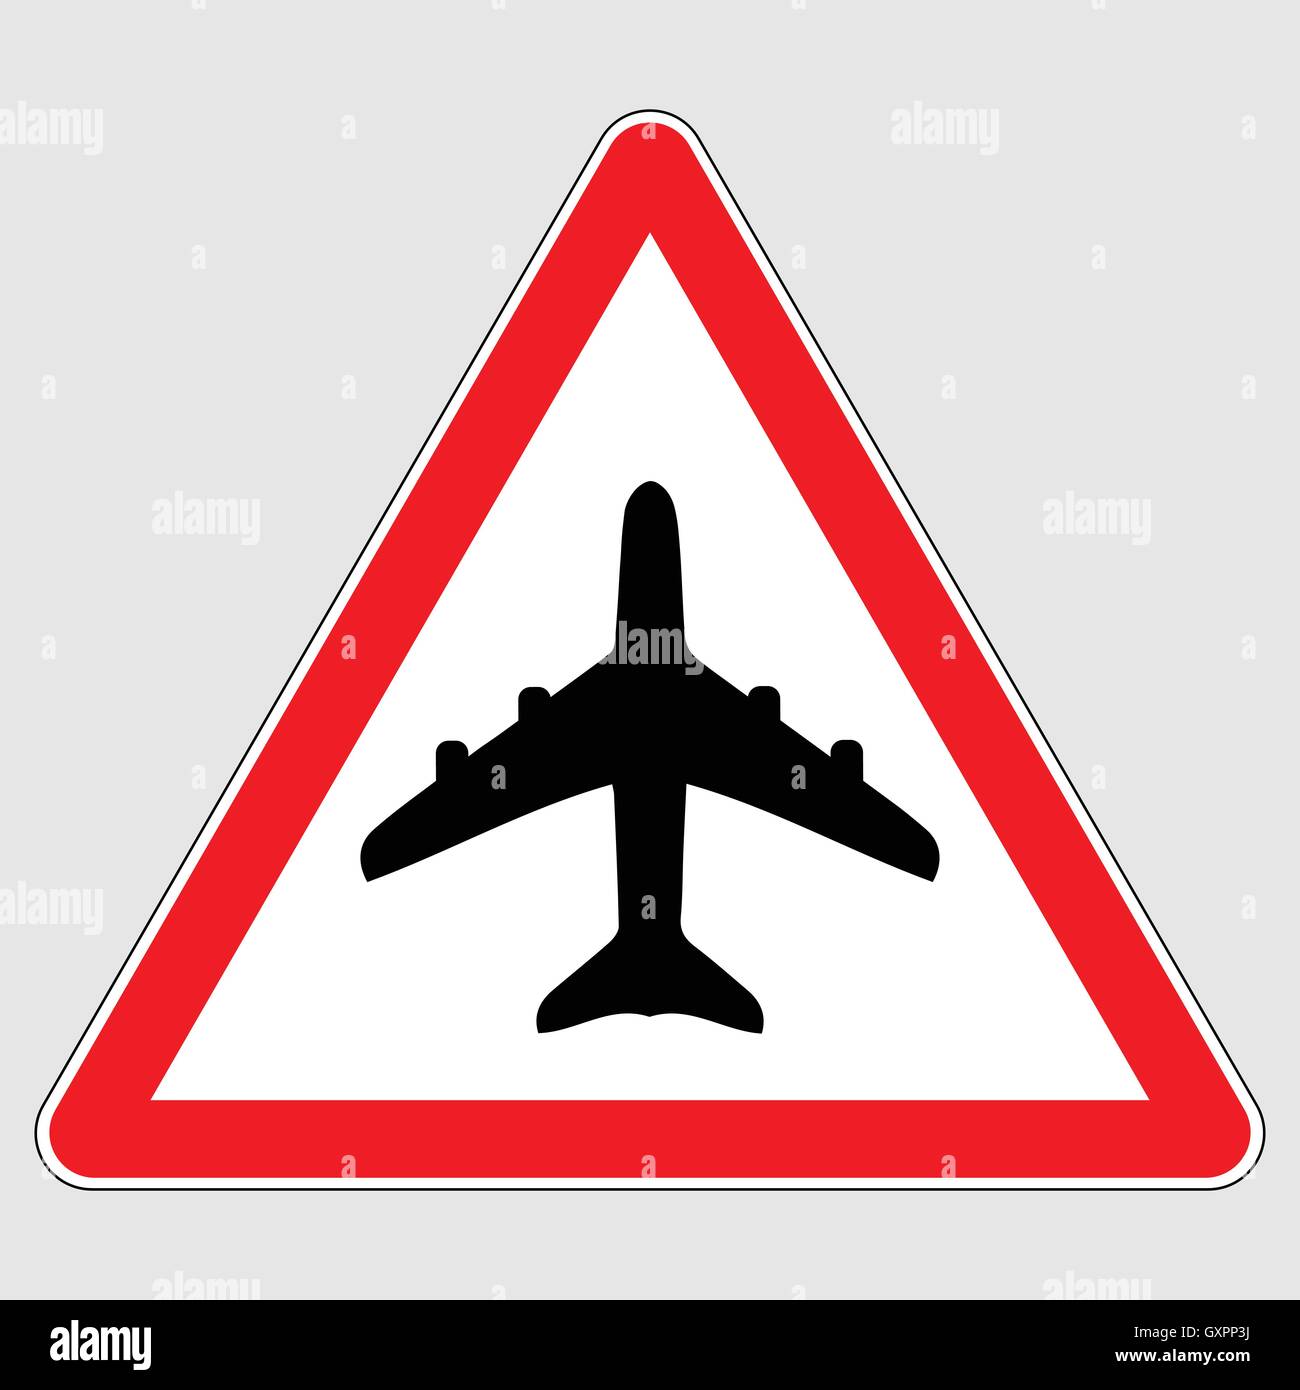 Airport warning sign, red triangle airport traffic sign, airplane traffic sign, vector illustration. Stock Vector